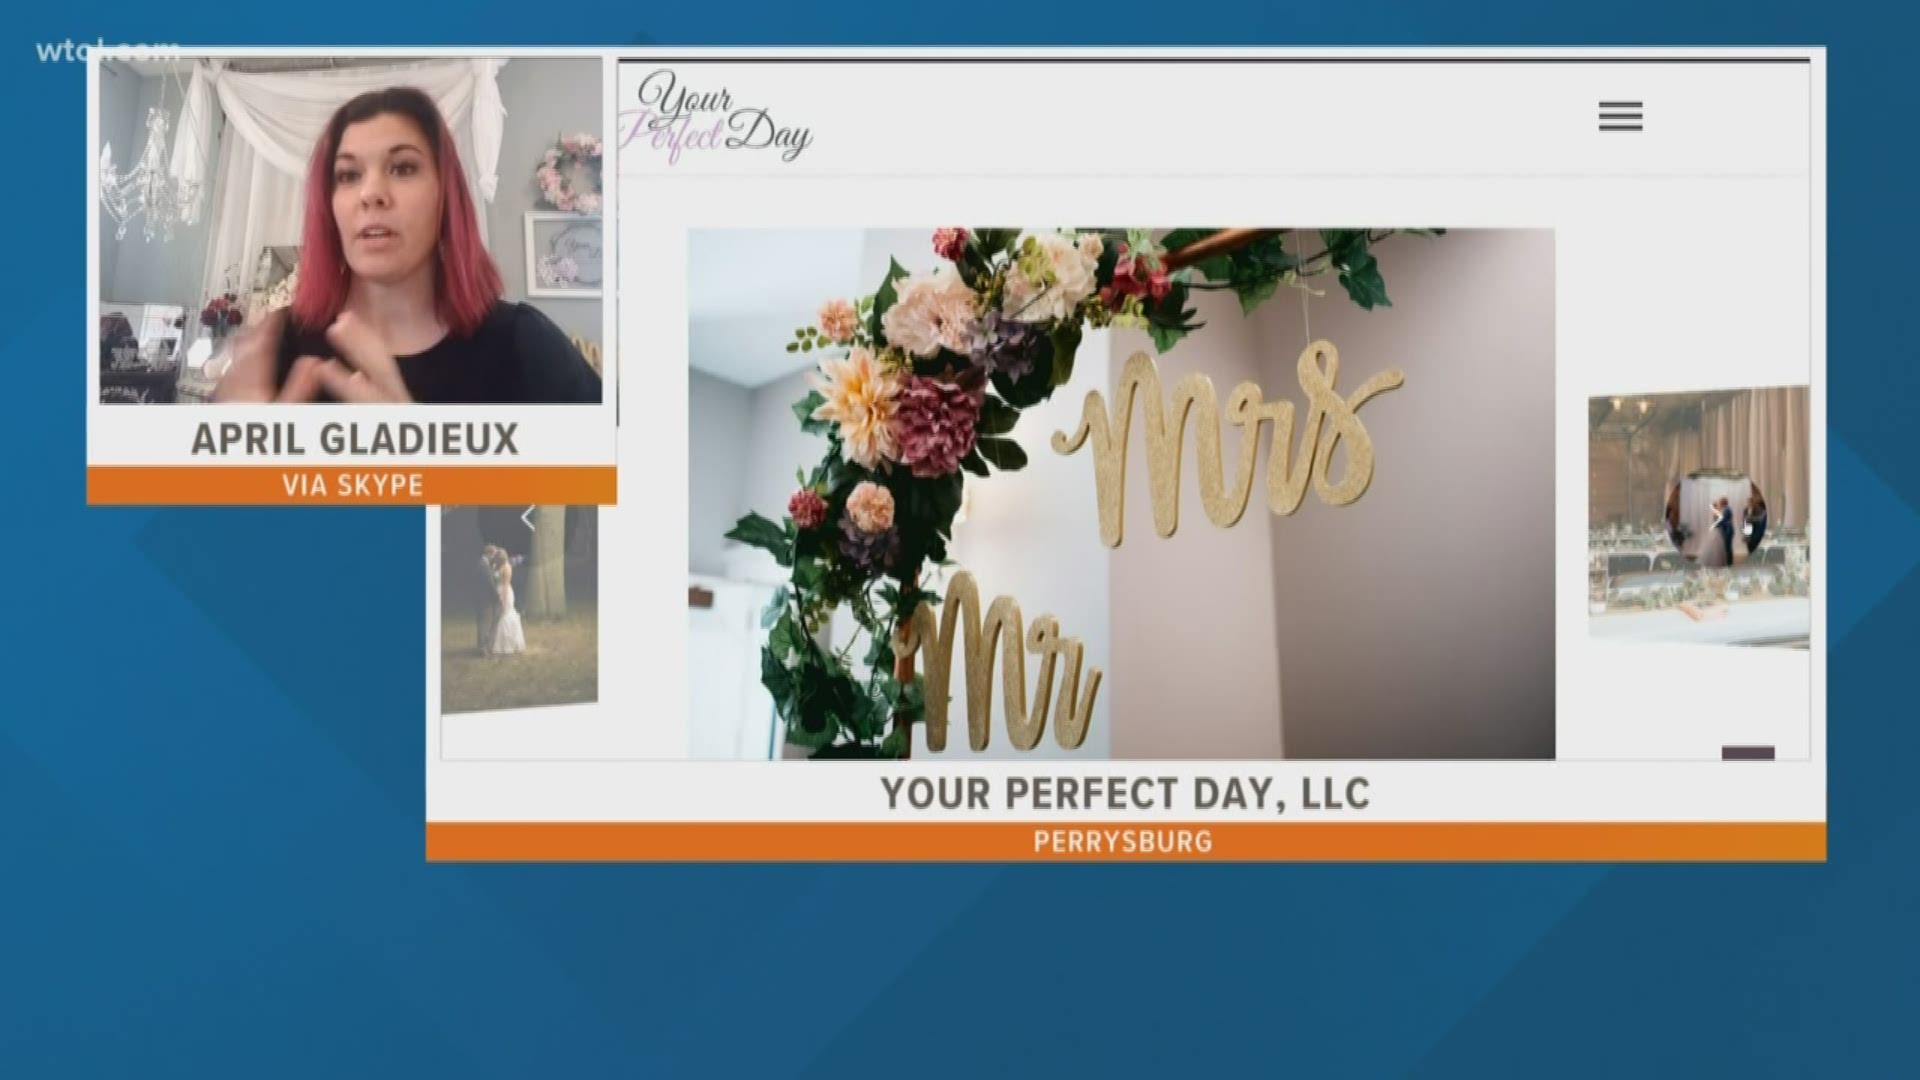 Local wedding planner talks about how the COVID-19 pandemic has impacted the wedding industry.